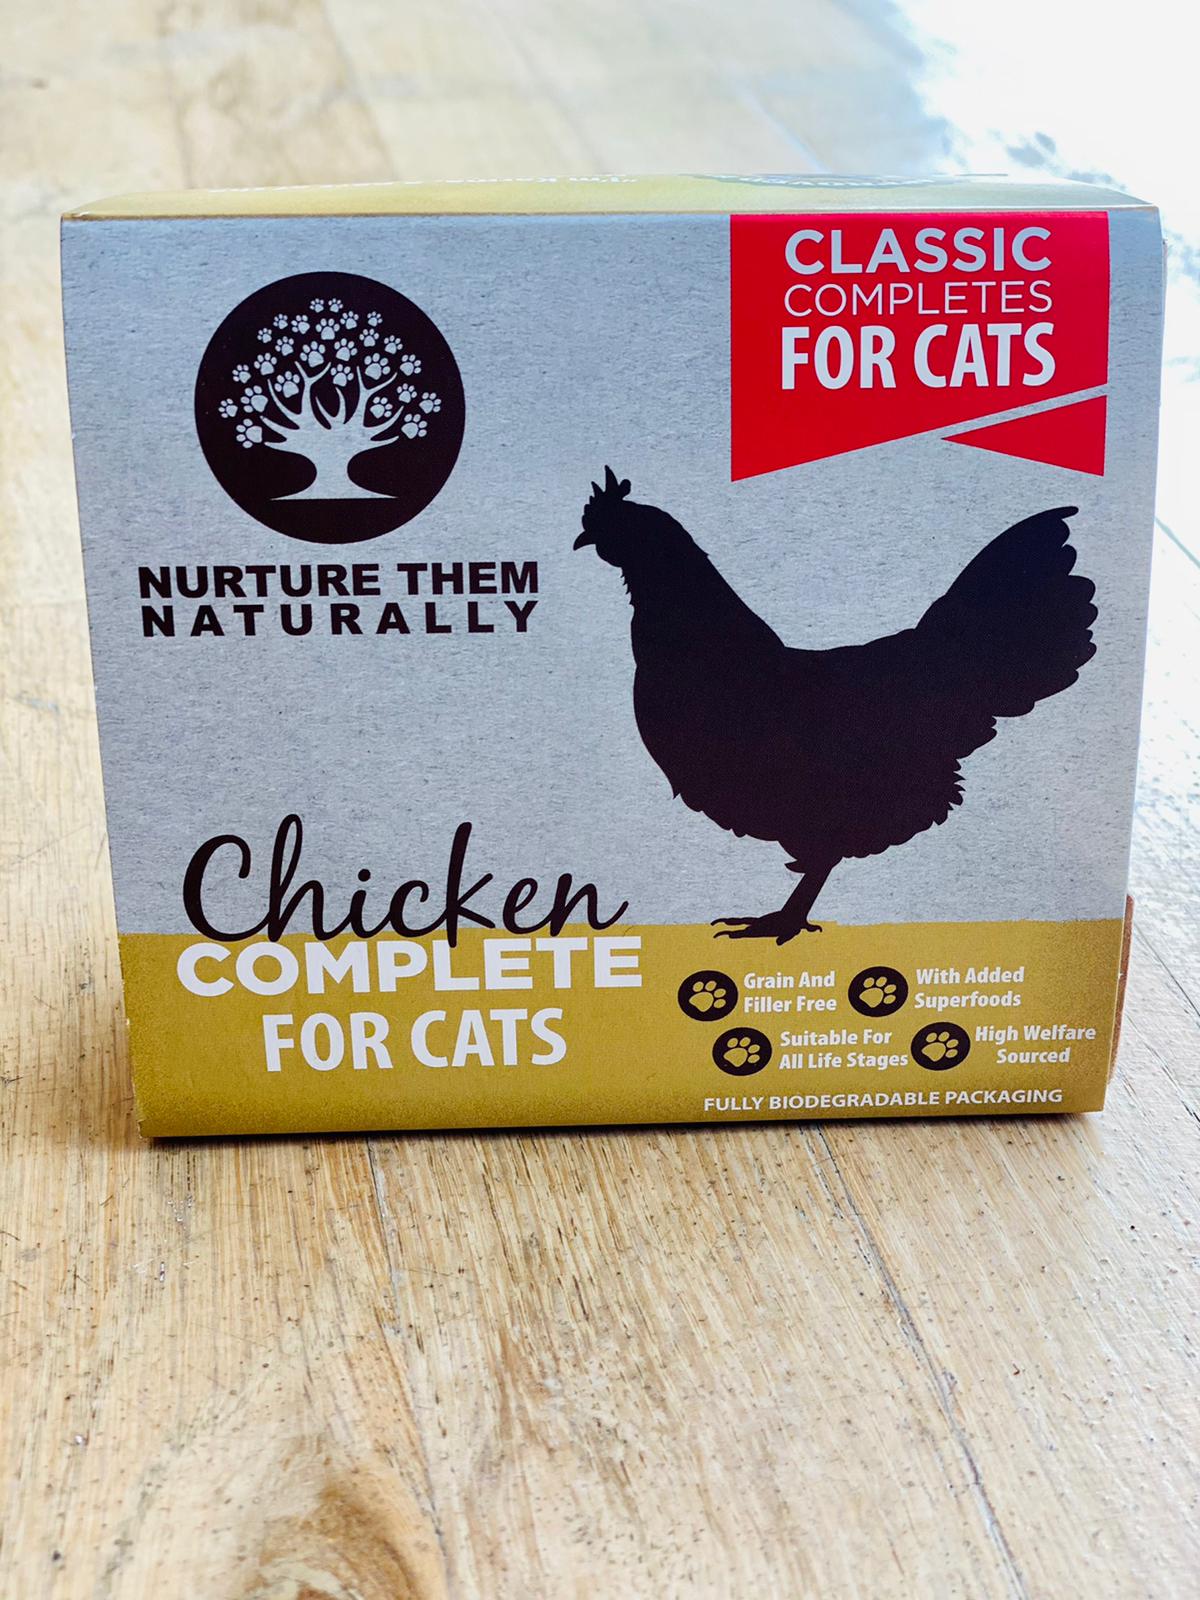 nurture them naturally chicken complete for cats